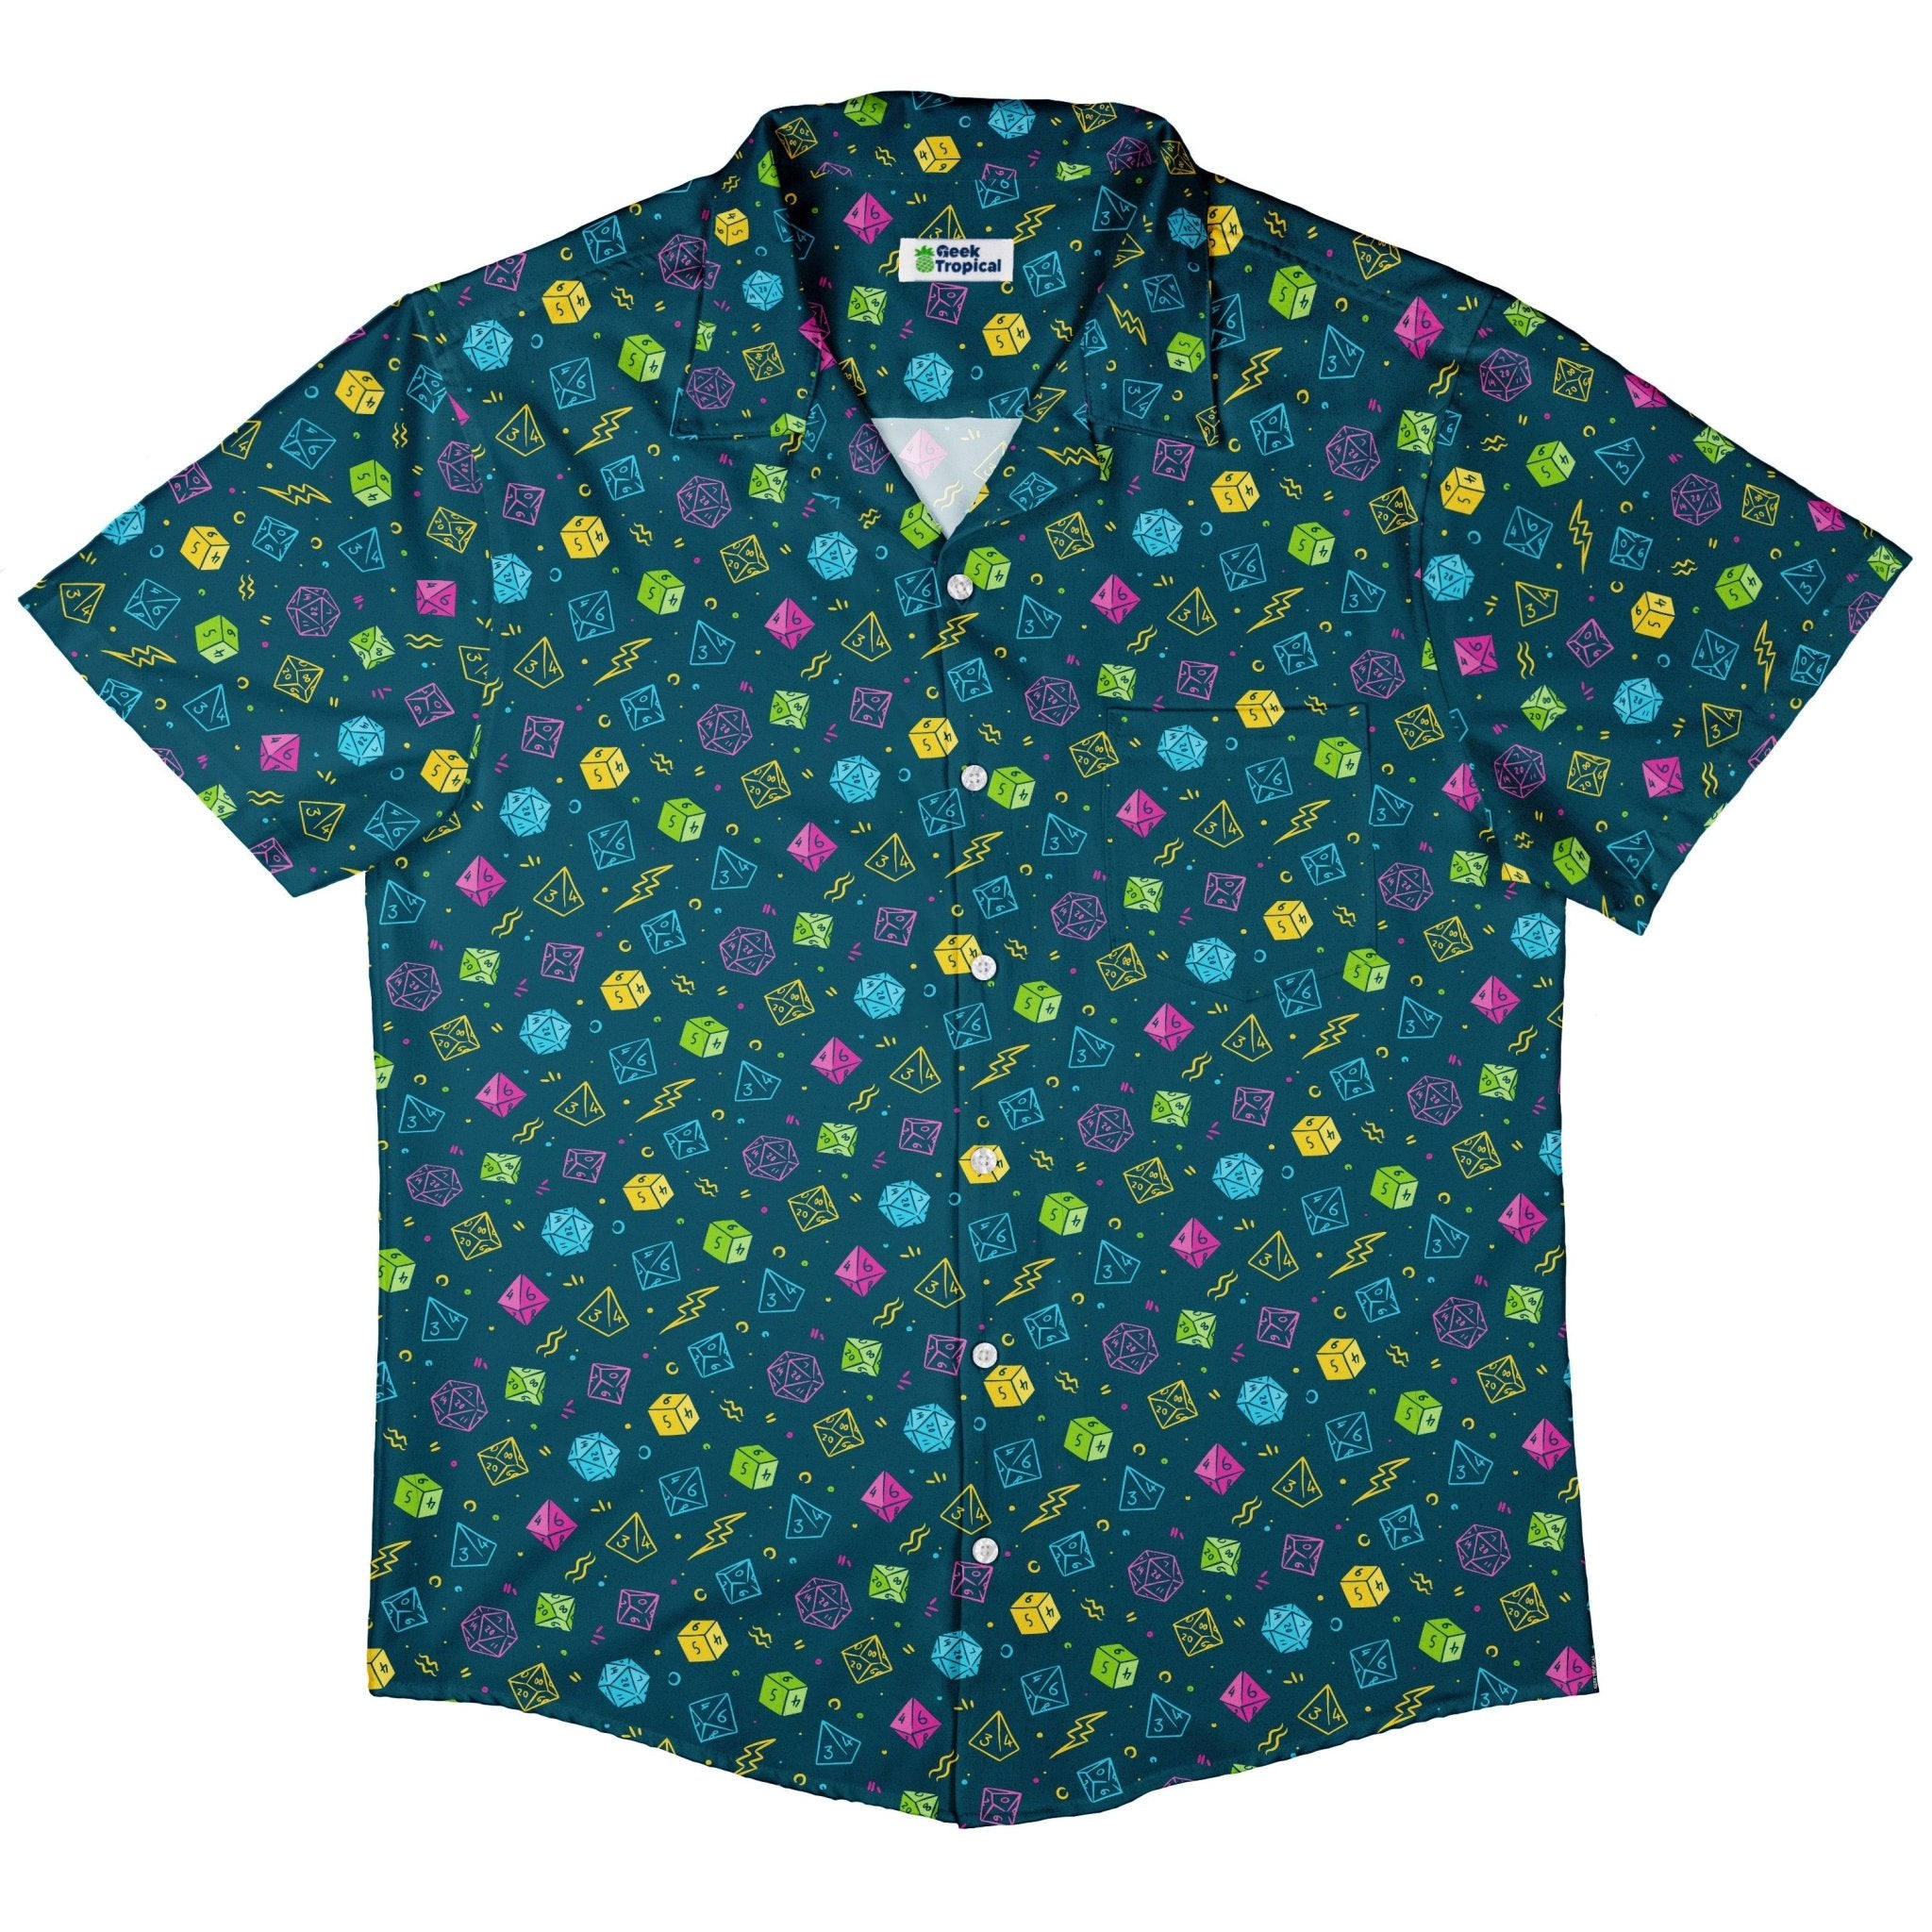 Dnd RPG Dice Blue Button Up Shirt - adult sizing - dnd & rpg print - Maximalist Patterns